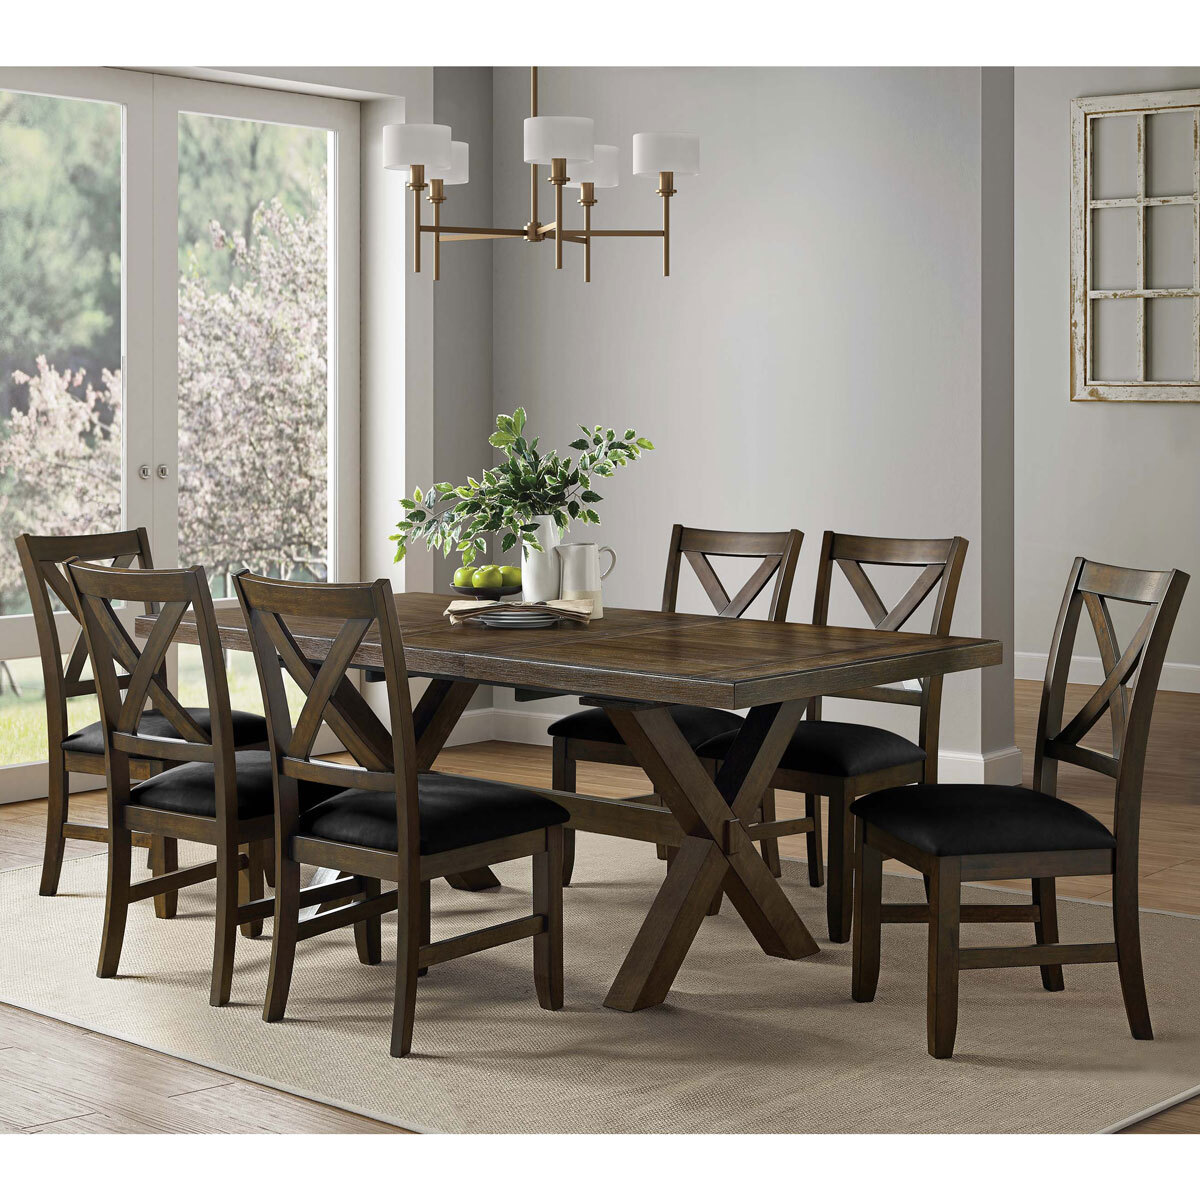 Bayside Furnishings Braeden Extending, Costco Leather Dining Room Chairs